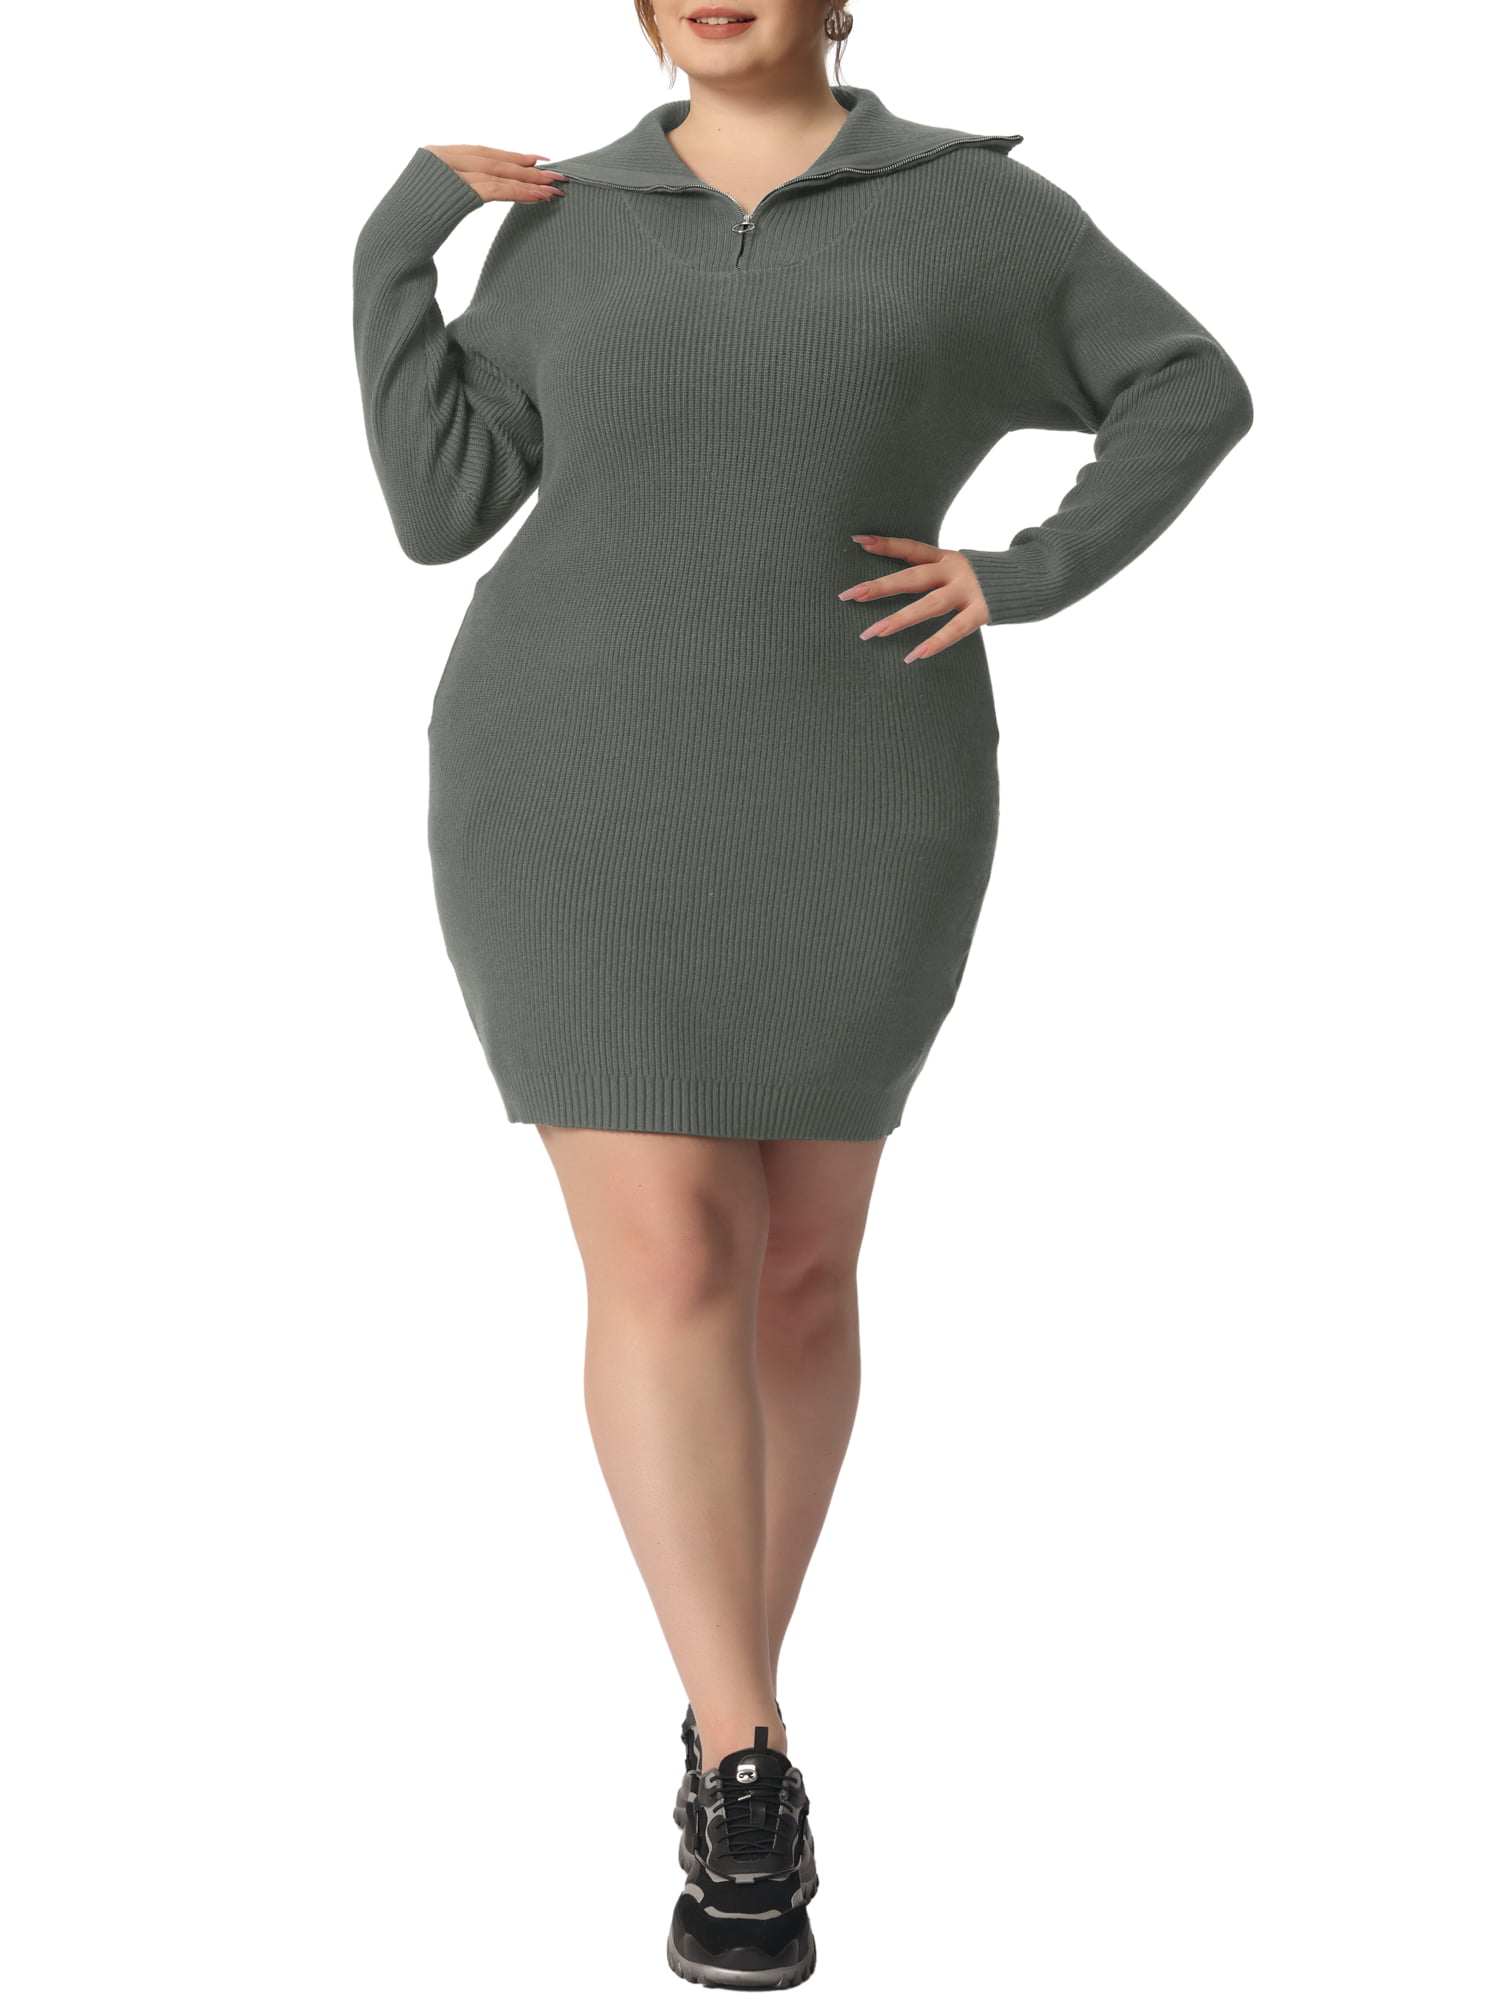  AKSODJF Sweaters For Women Kint Long,things under 3  dollars,free stuff under 1 dollar,plus size dresses under 10 dollars,free items  under 1 dollar,deals of the day clearance prime,outlet store deals :  Clothing